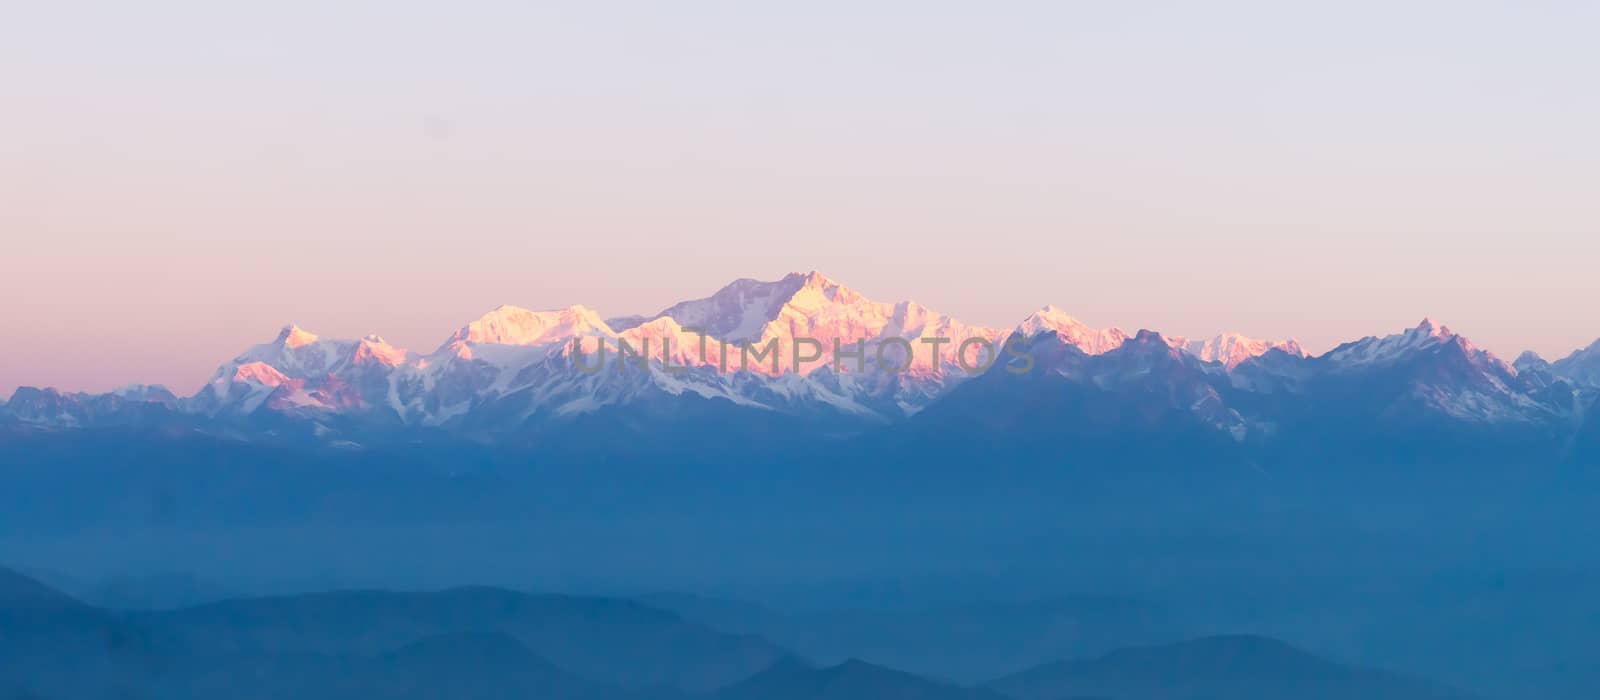 Panorama of majestic Mount Kanchendzonga range of himalayas at first sunrise from Tiger Hill. First ray of sun struck mountain starting beautiful day on entire nature around. Darjeeling, Sikkim, India